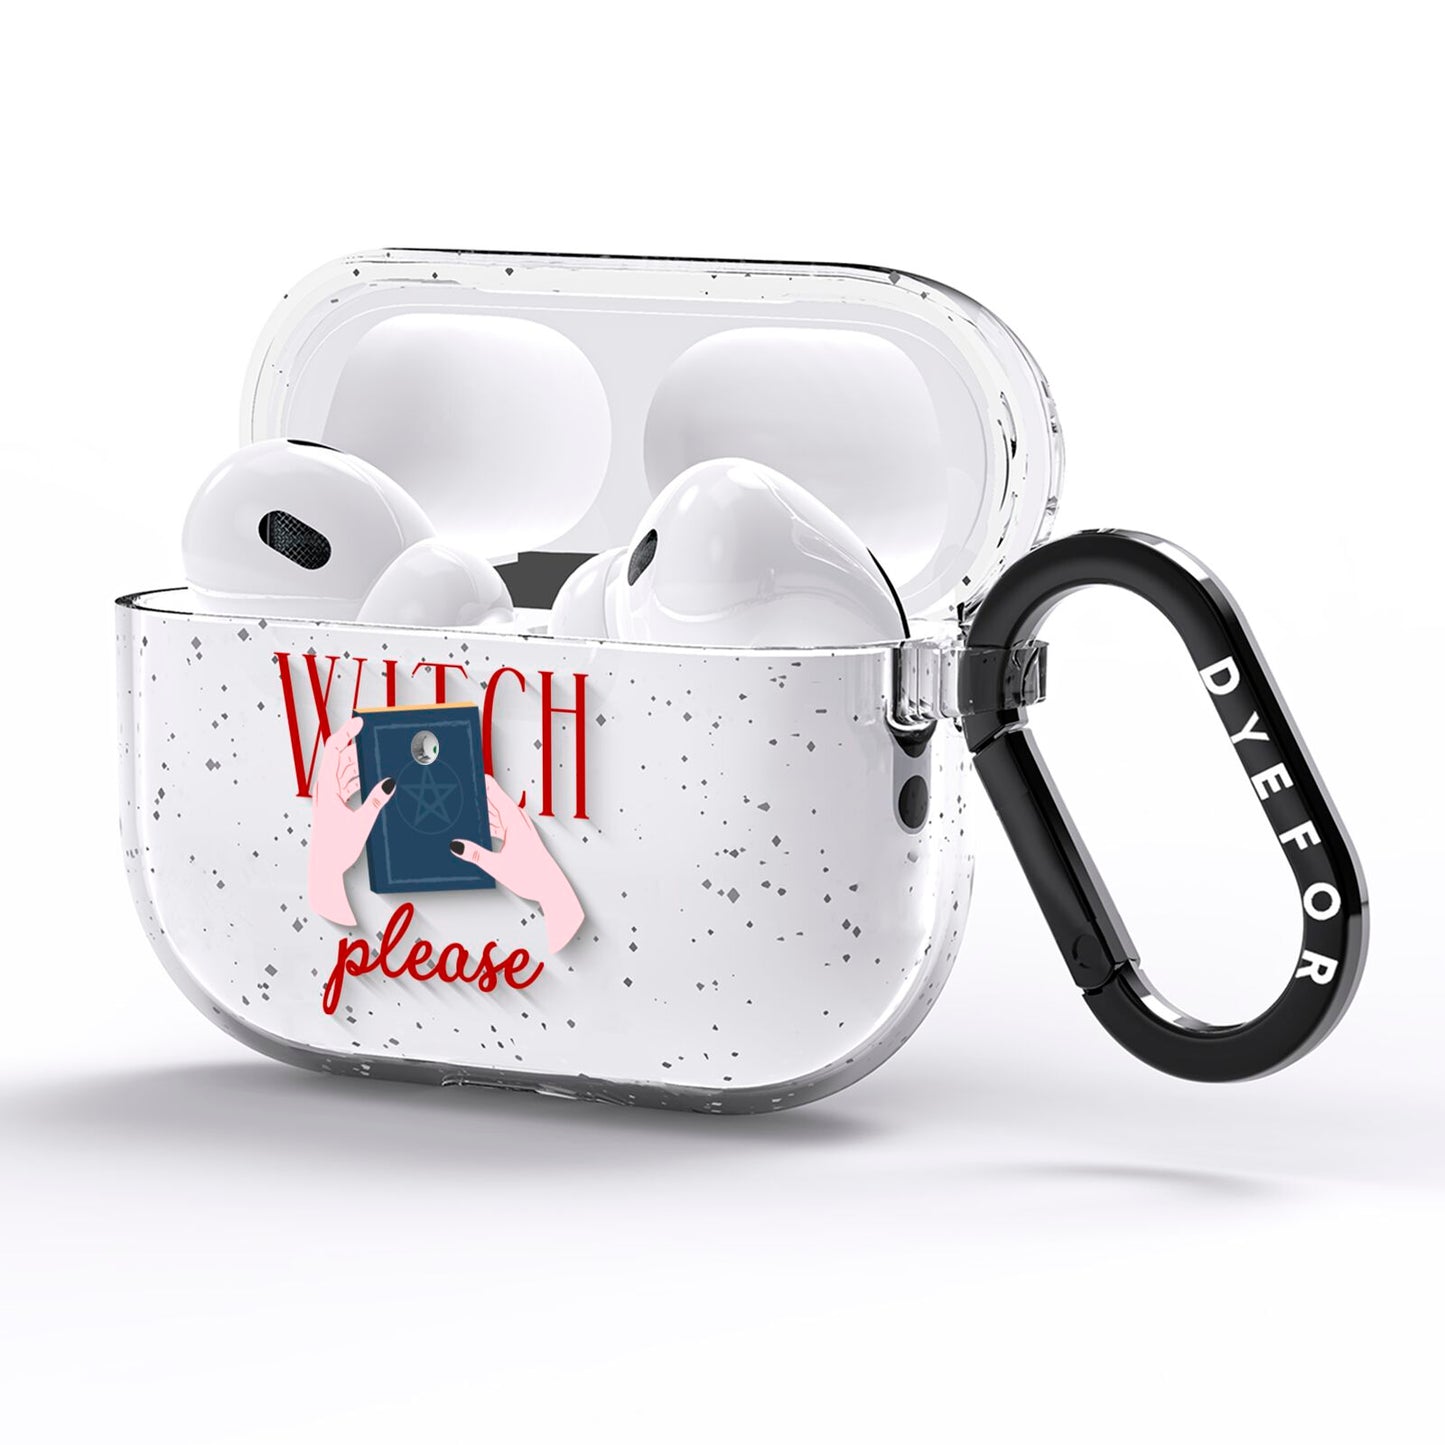 Witty Witch Illustration AirPods Pro Glitter Case Side Image